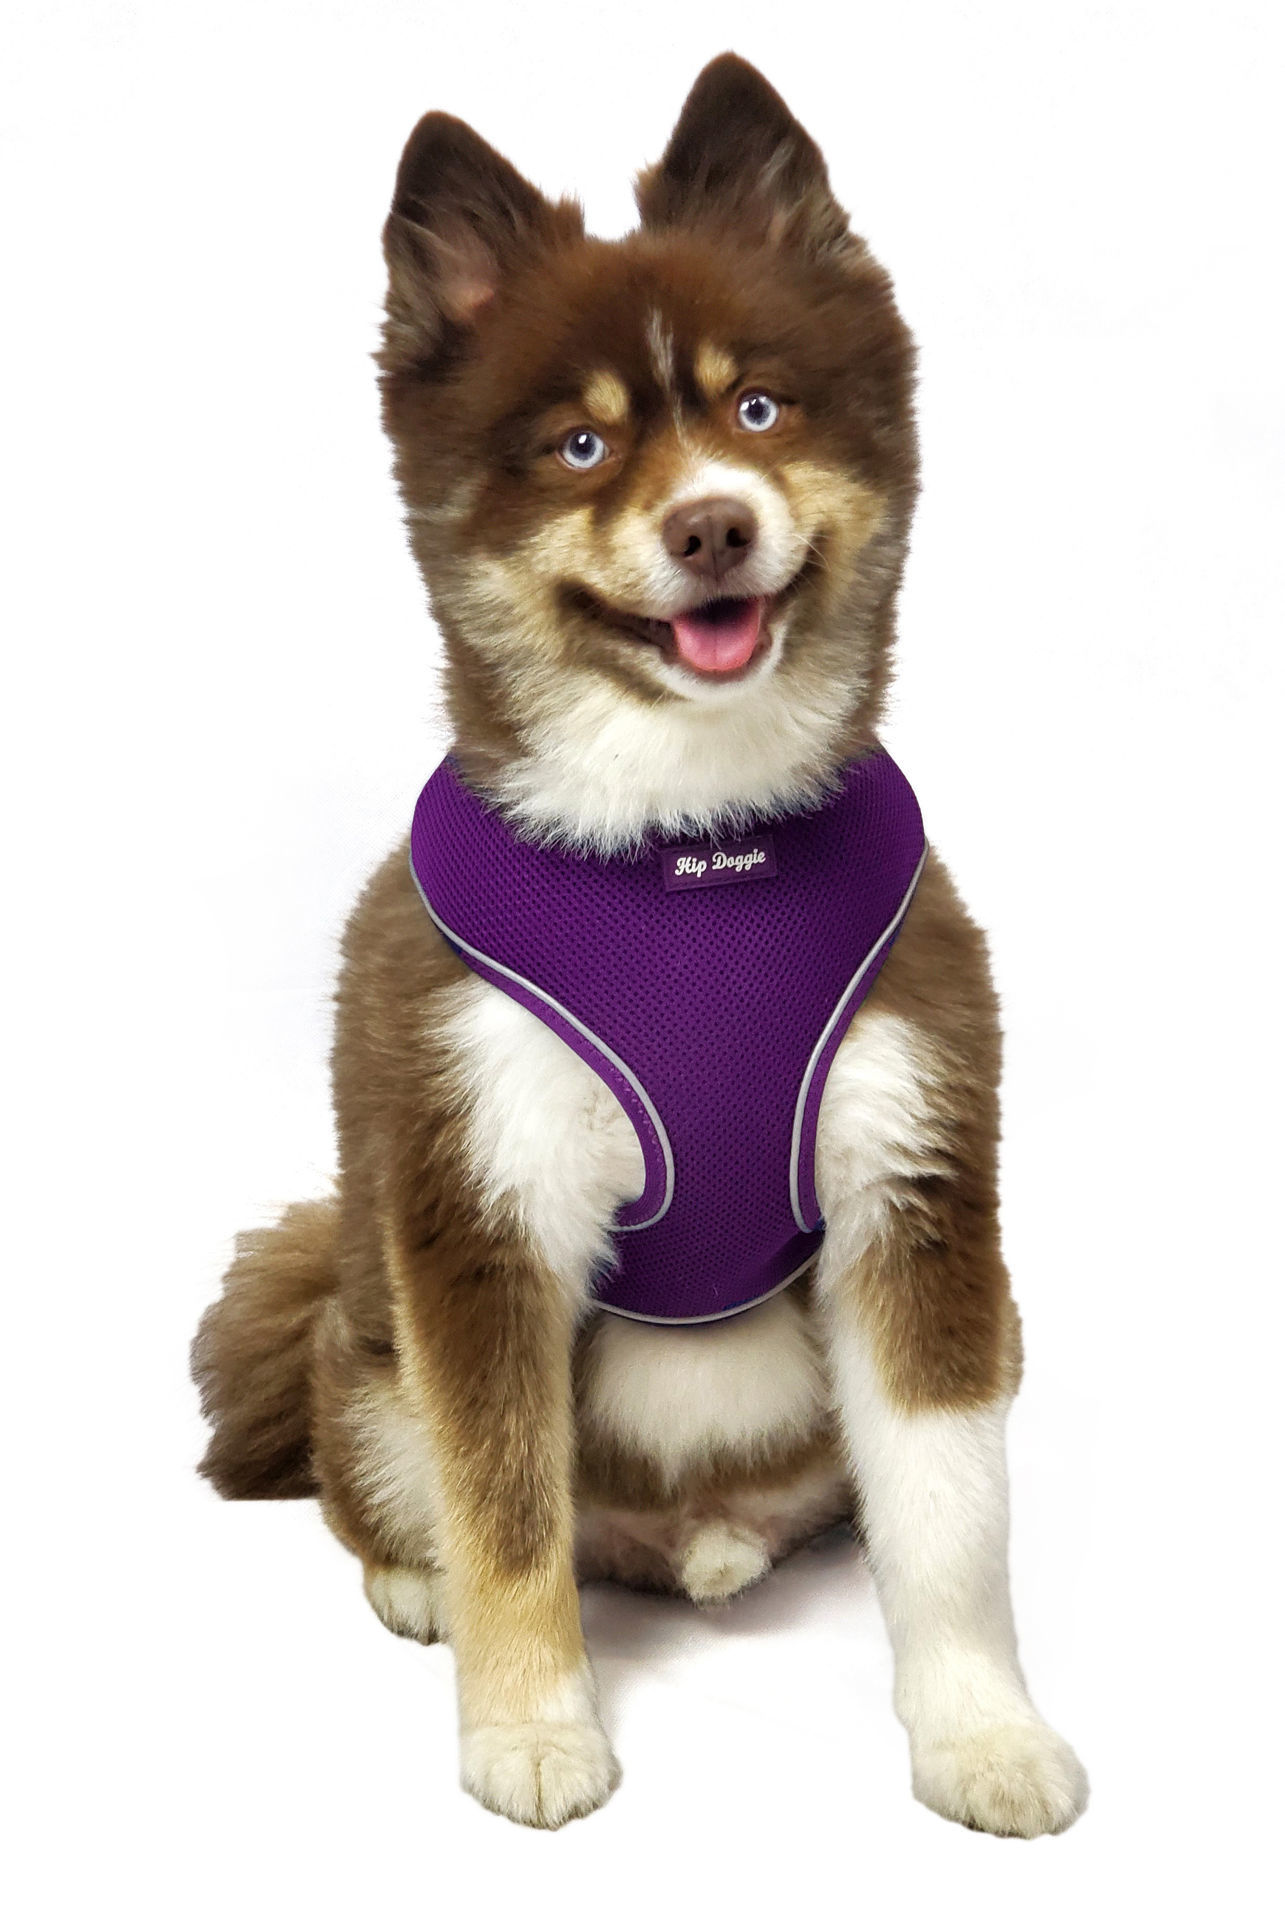 Picture of Ultra Comfort Reflective Harness  - Purple